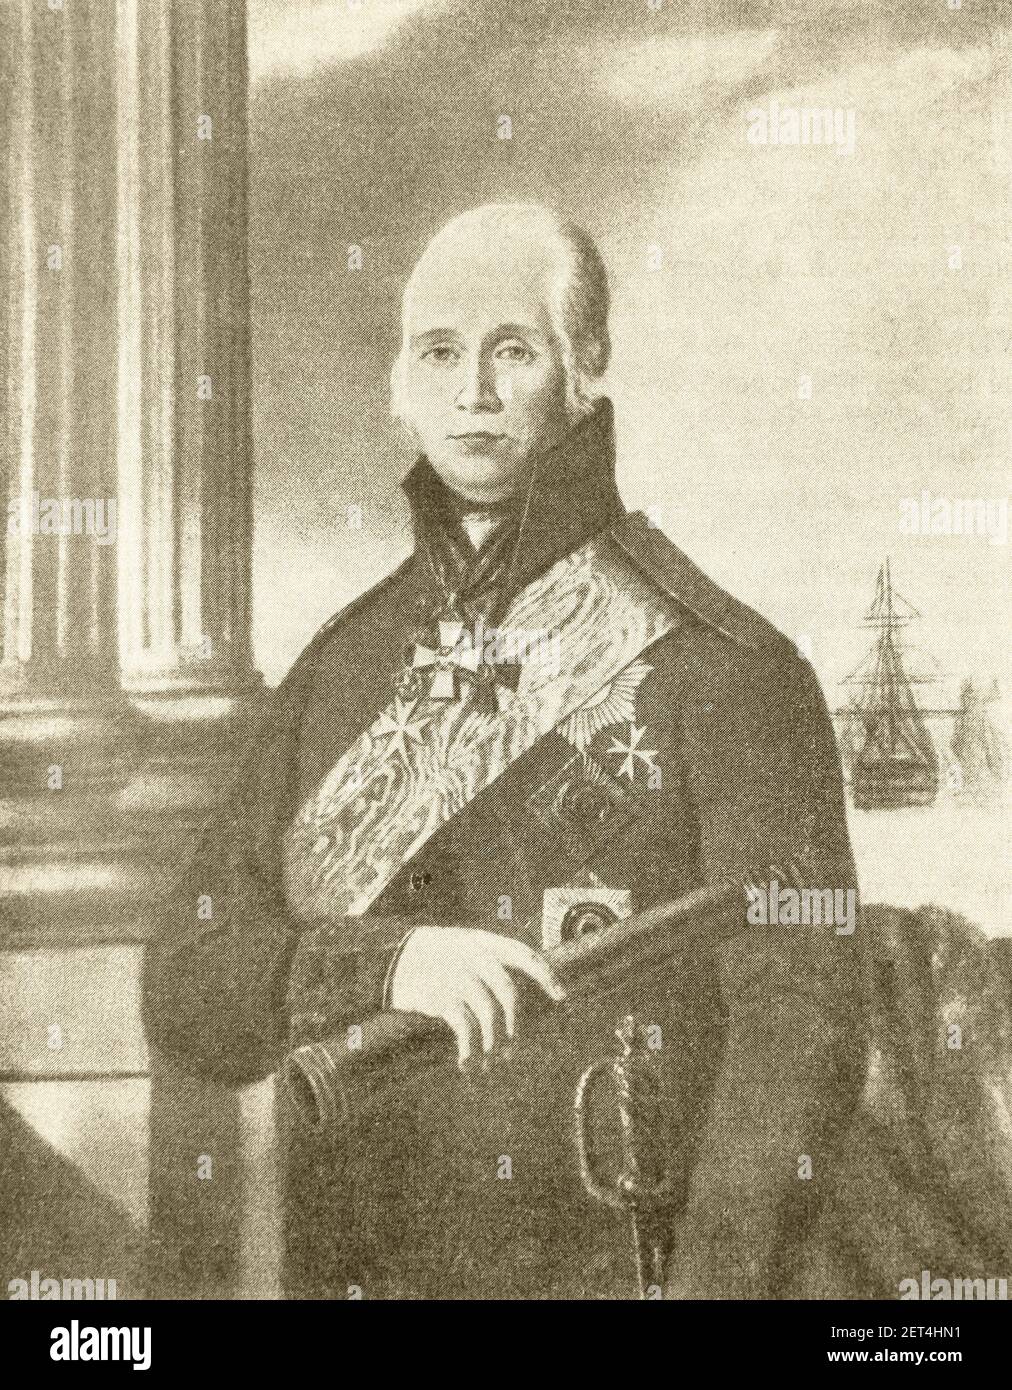 Portrait of Fyodor Ushakov. Lithograph of the 19th century. Fyodor Fyodorovich Ushakov (1745 – 1817) was the most illustrious Russian naval commander and admiral of the 18th century. He is notable for winning every engagement he participated in as the Admiral of the Russian fleet. Stock Photo